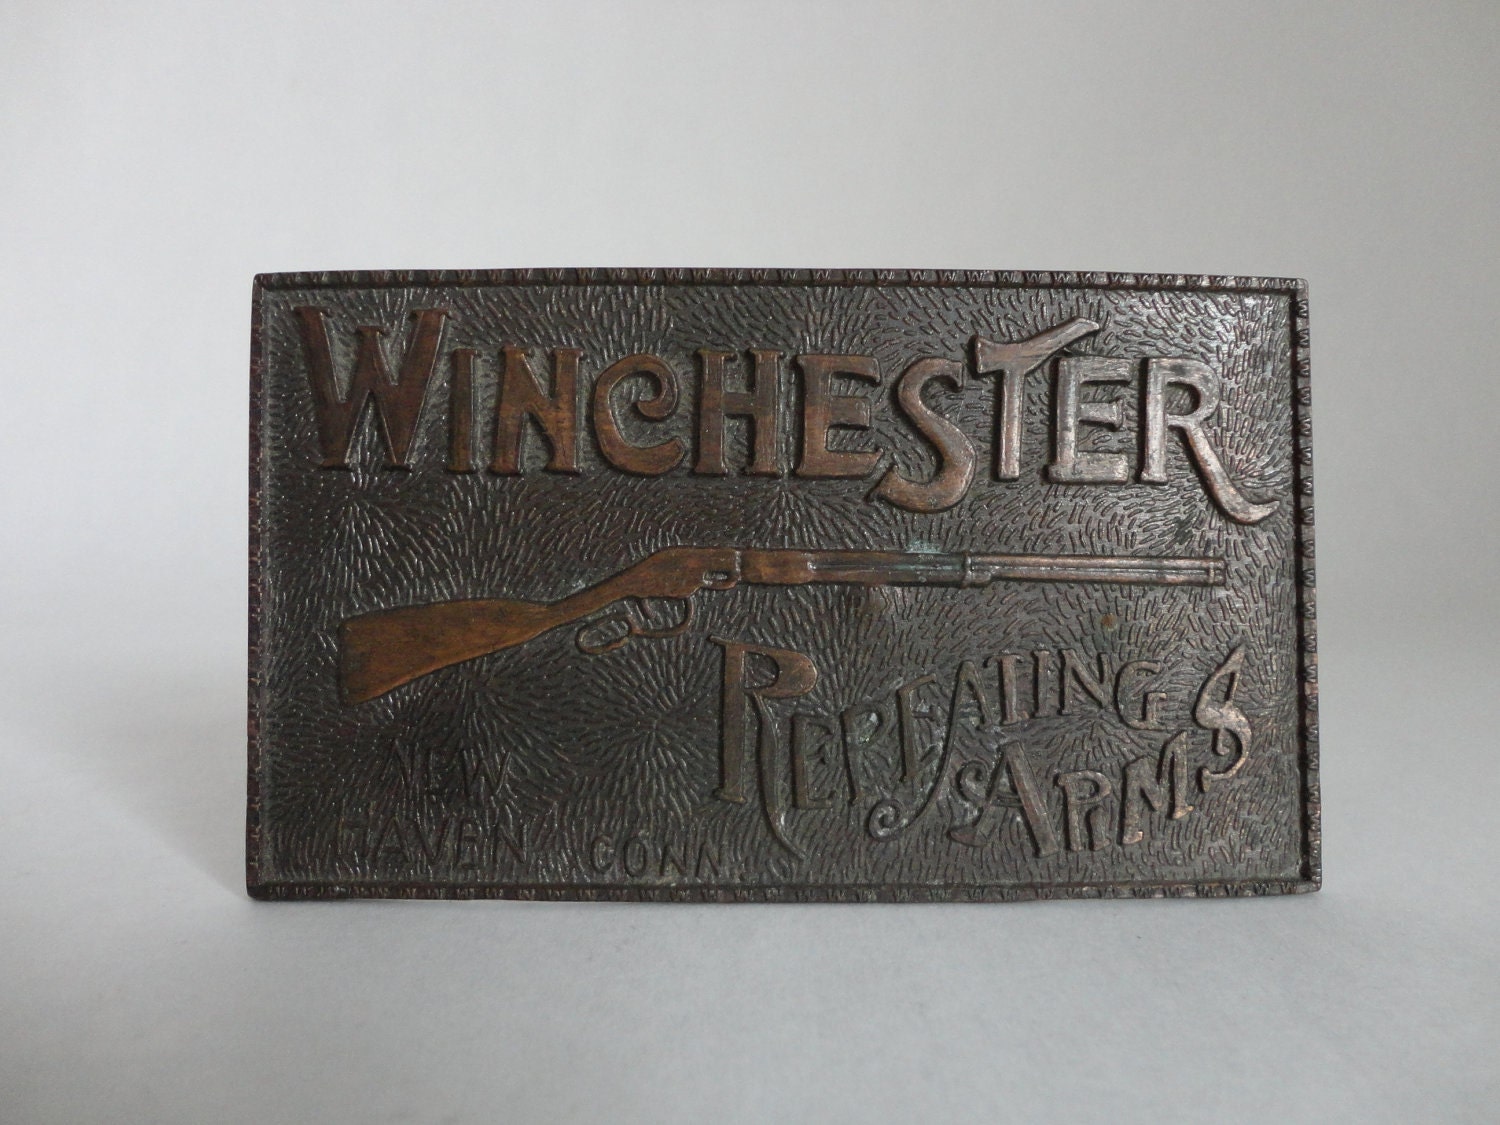 repeating arms...VINTAGE winchester BELT BUCKLE by buyoldschool